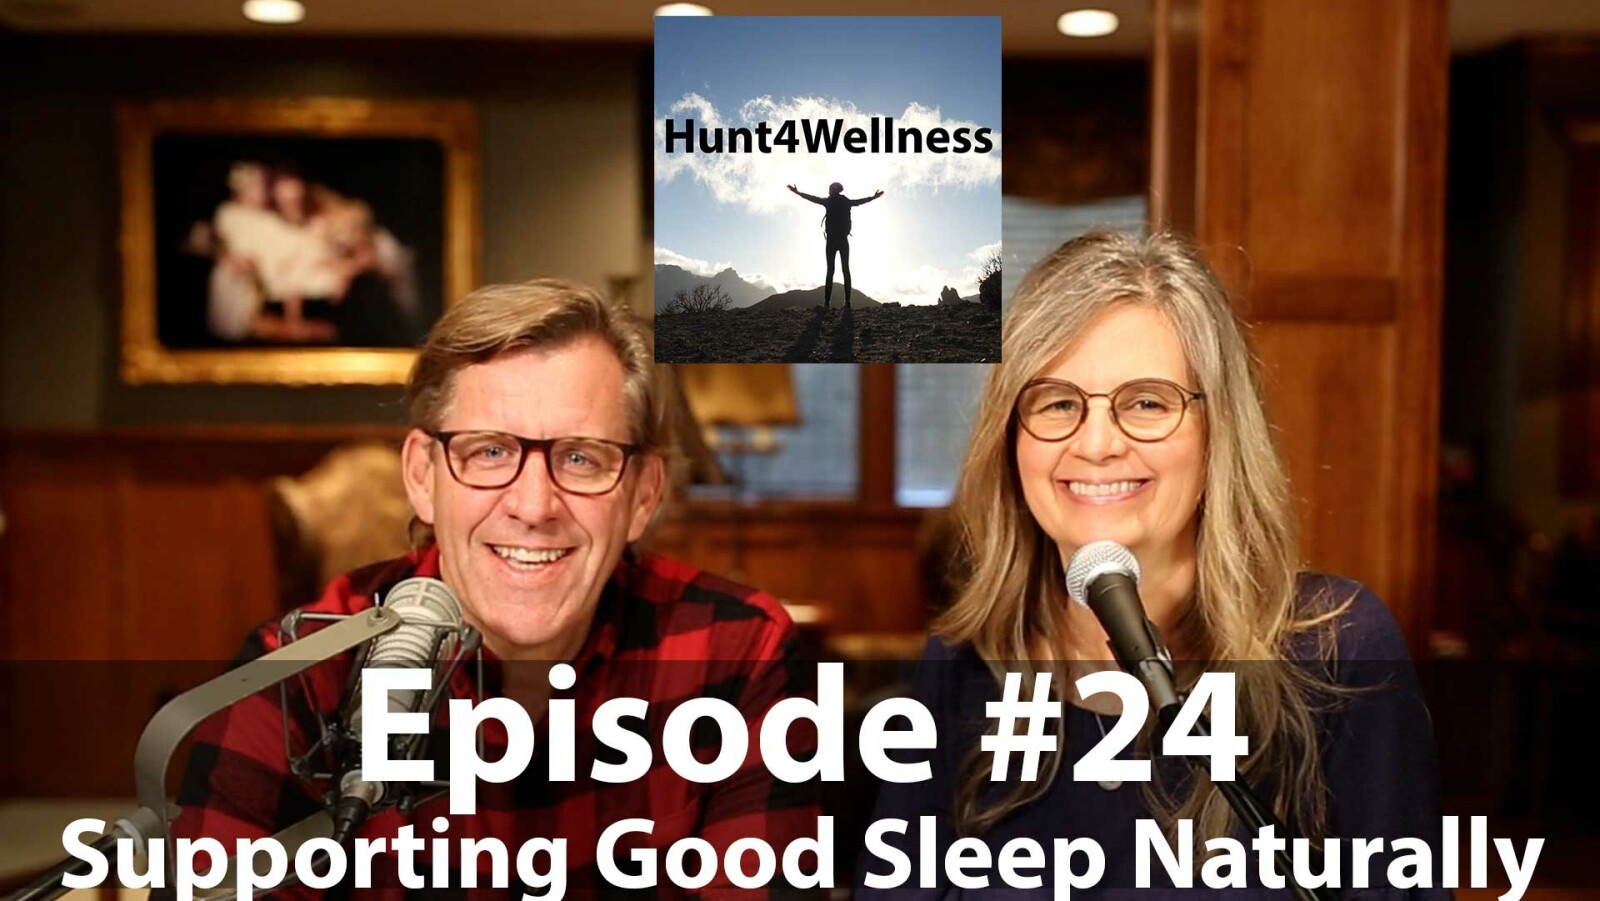 Episode #24 - Supporting Good Sleep Naturally